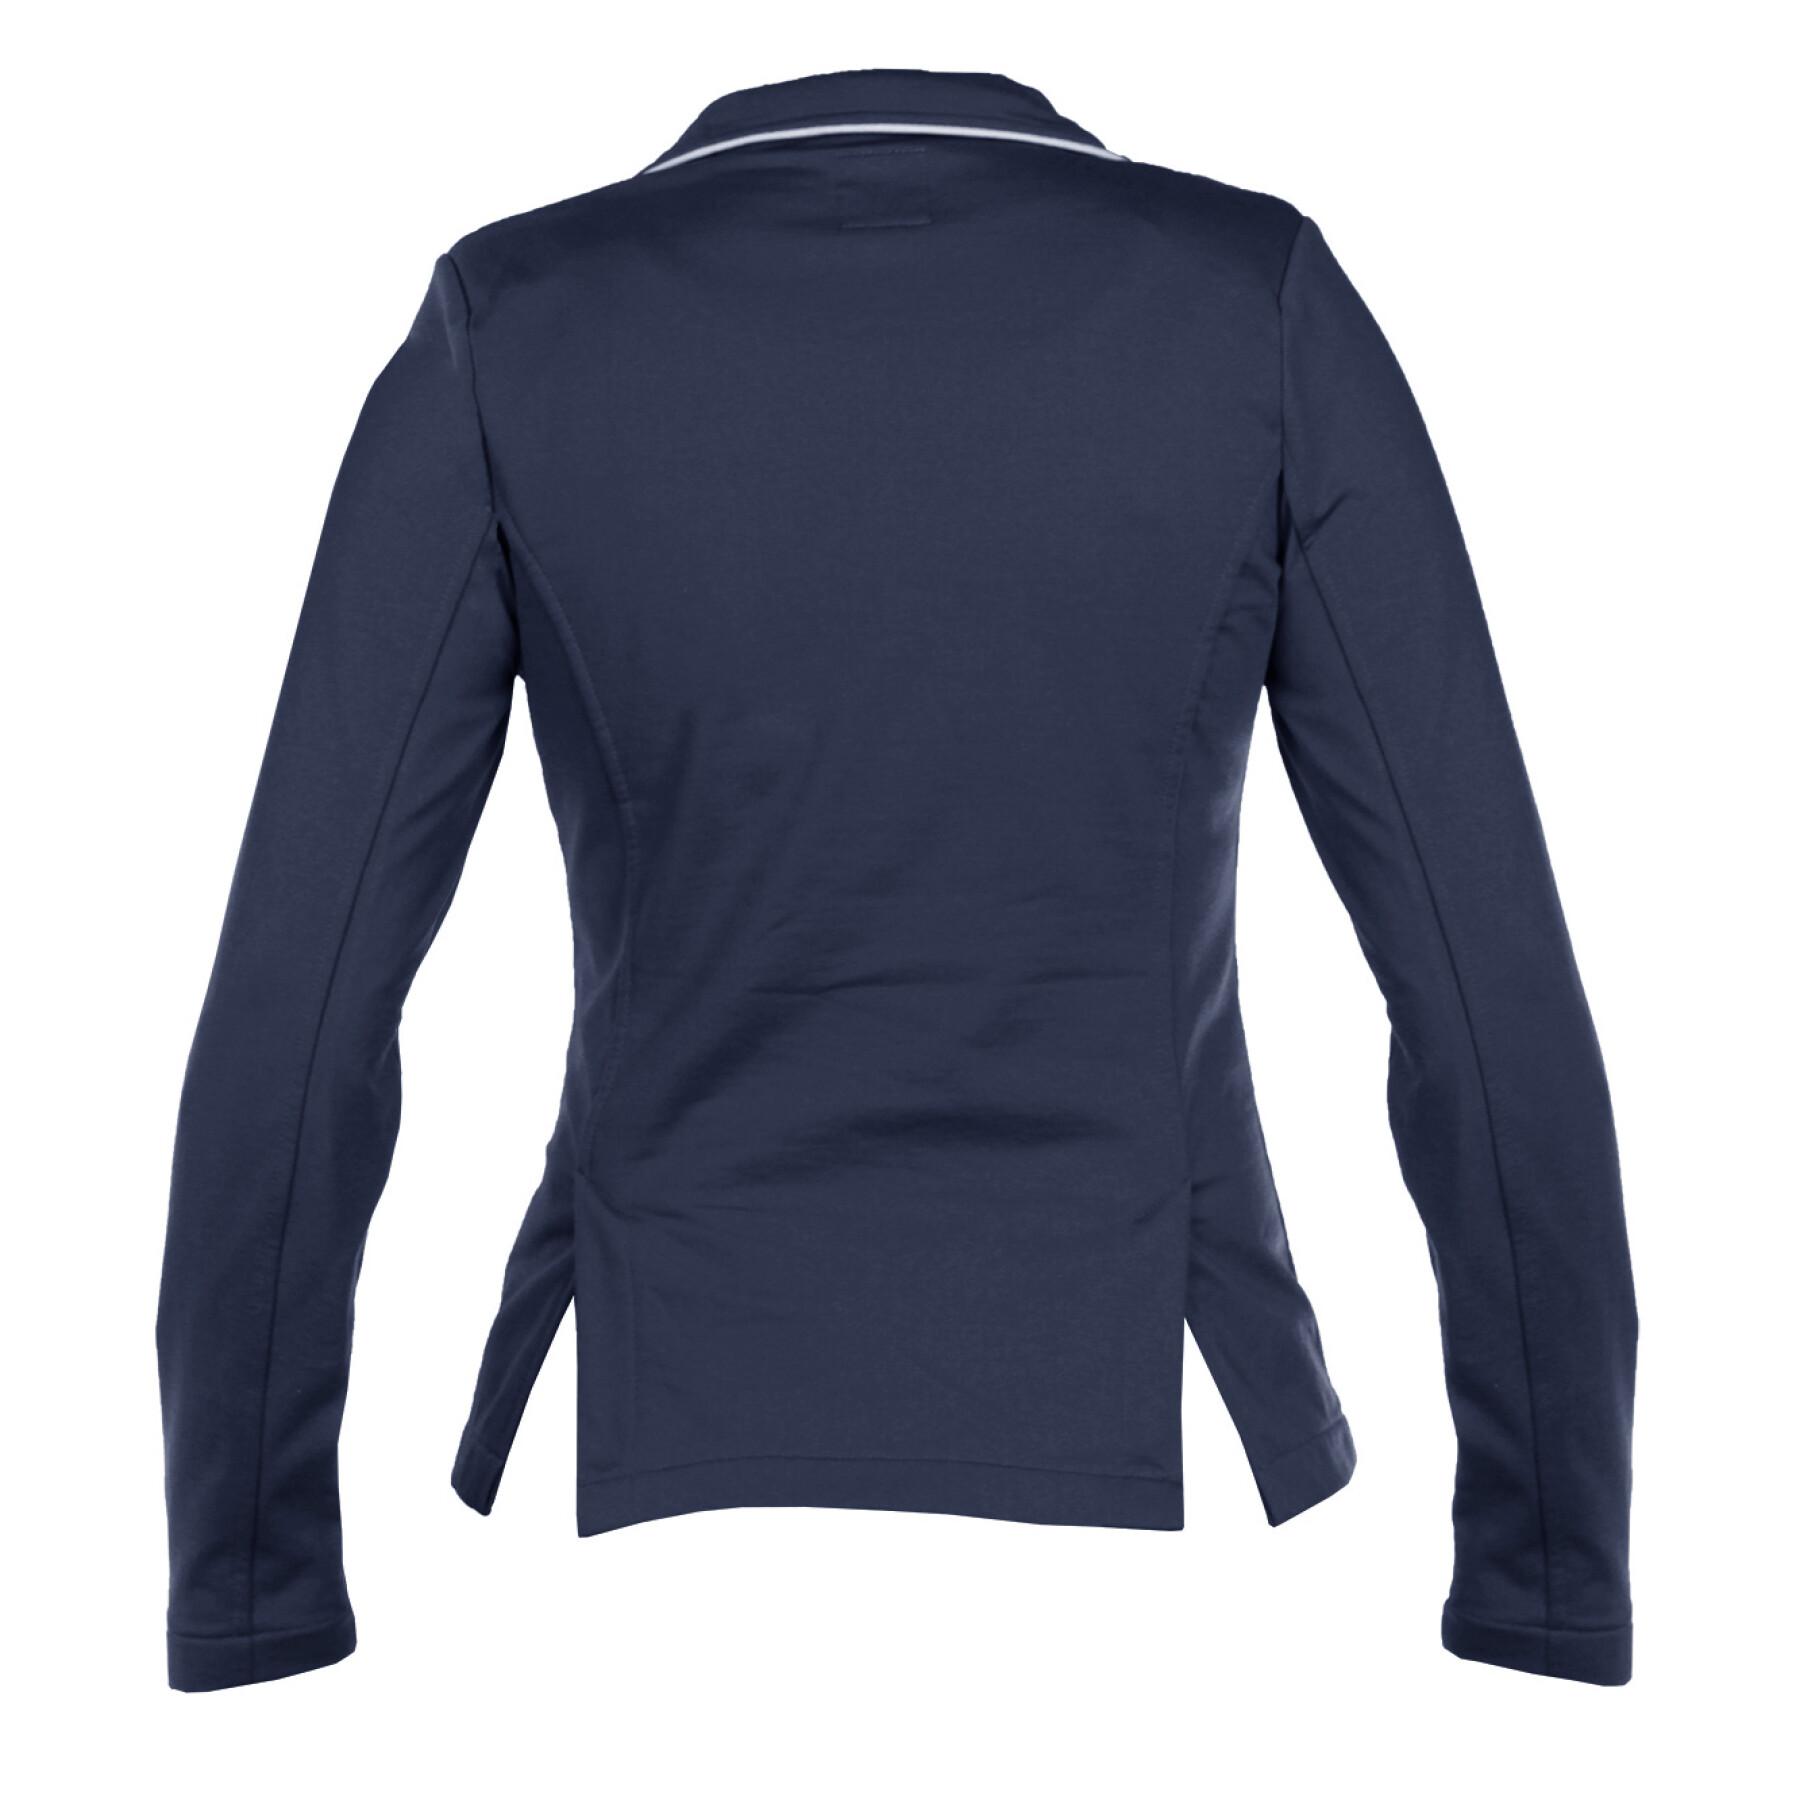 Women's competition jacket Horka